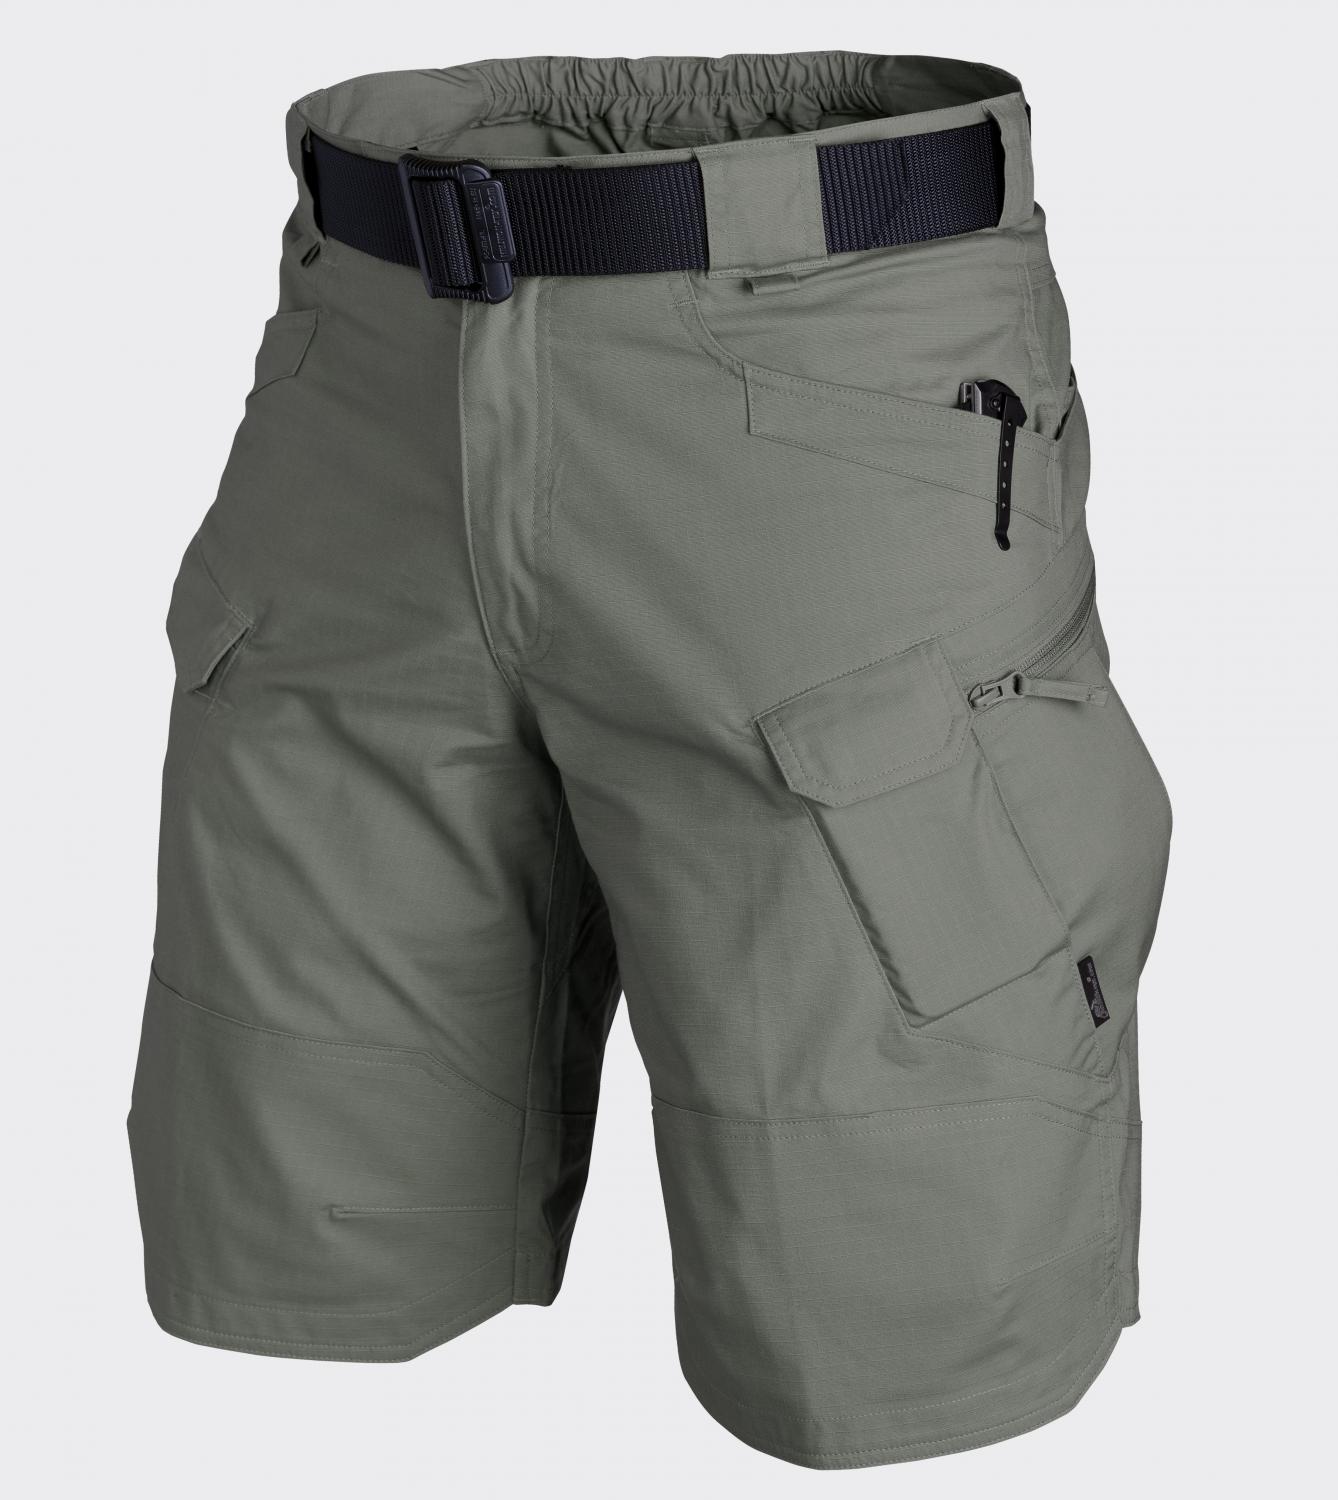 URBAN TACTICAL SHORTS® 11'' - PolyCotton Ripstop Olive Drab